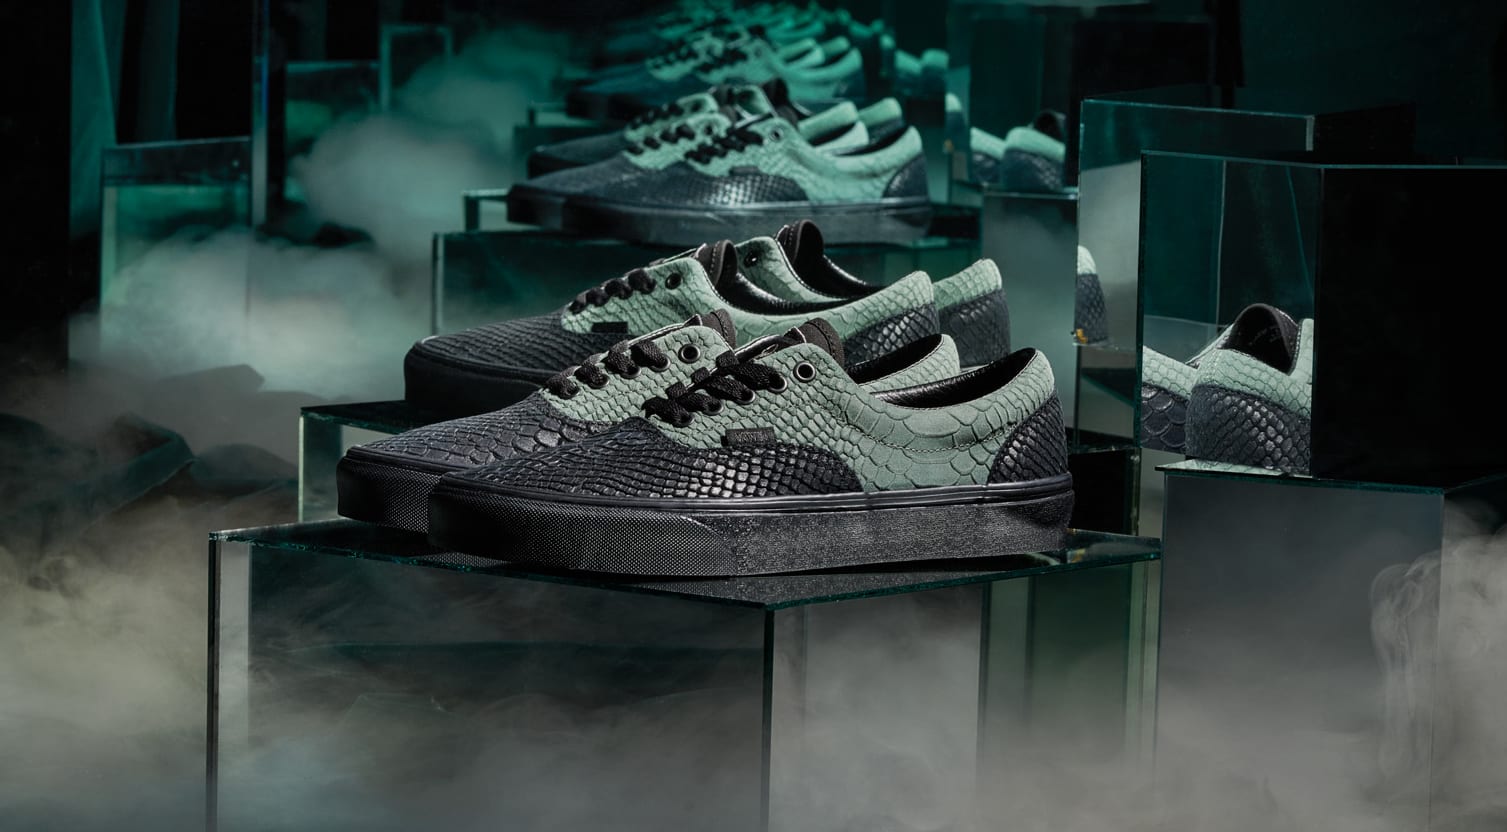 Represent Your Hogwarts House With the Harry Potter x Vans Collection |